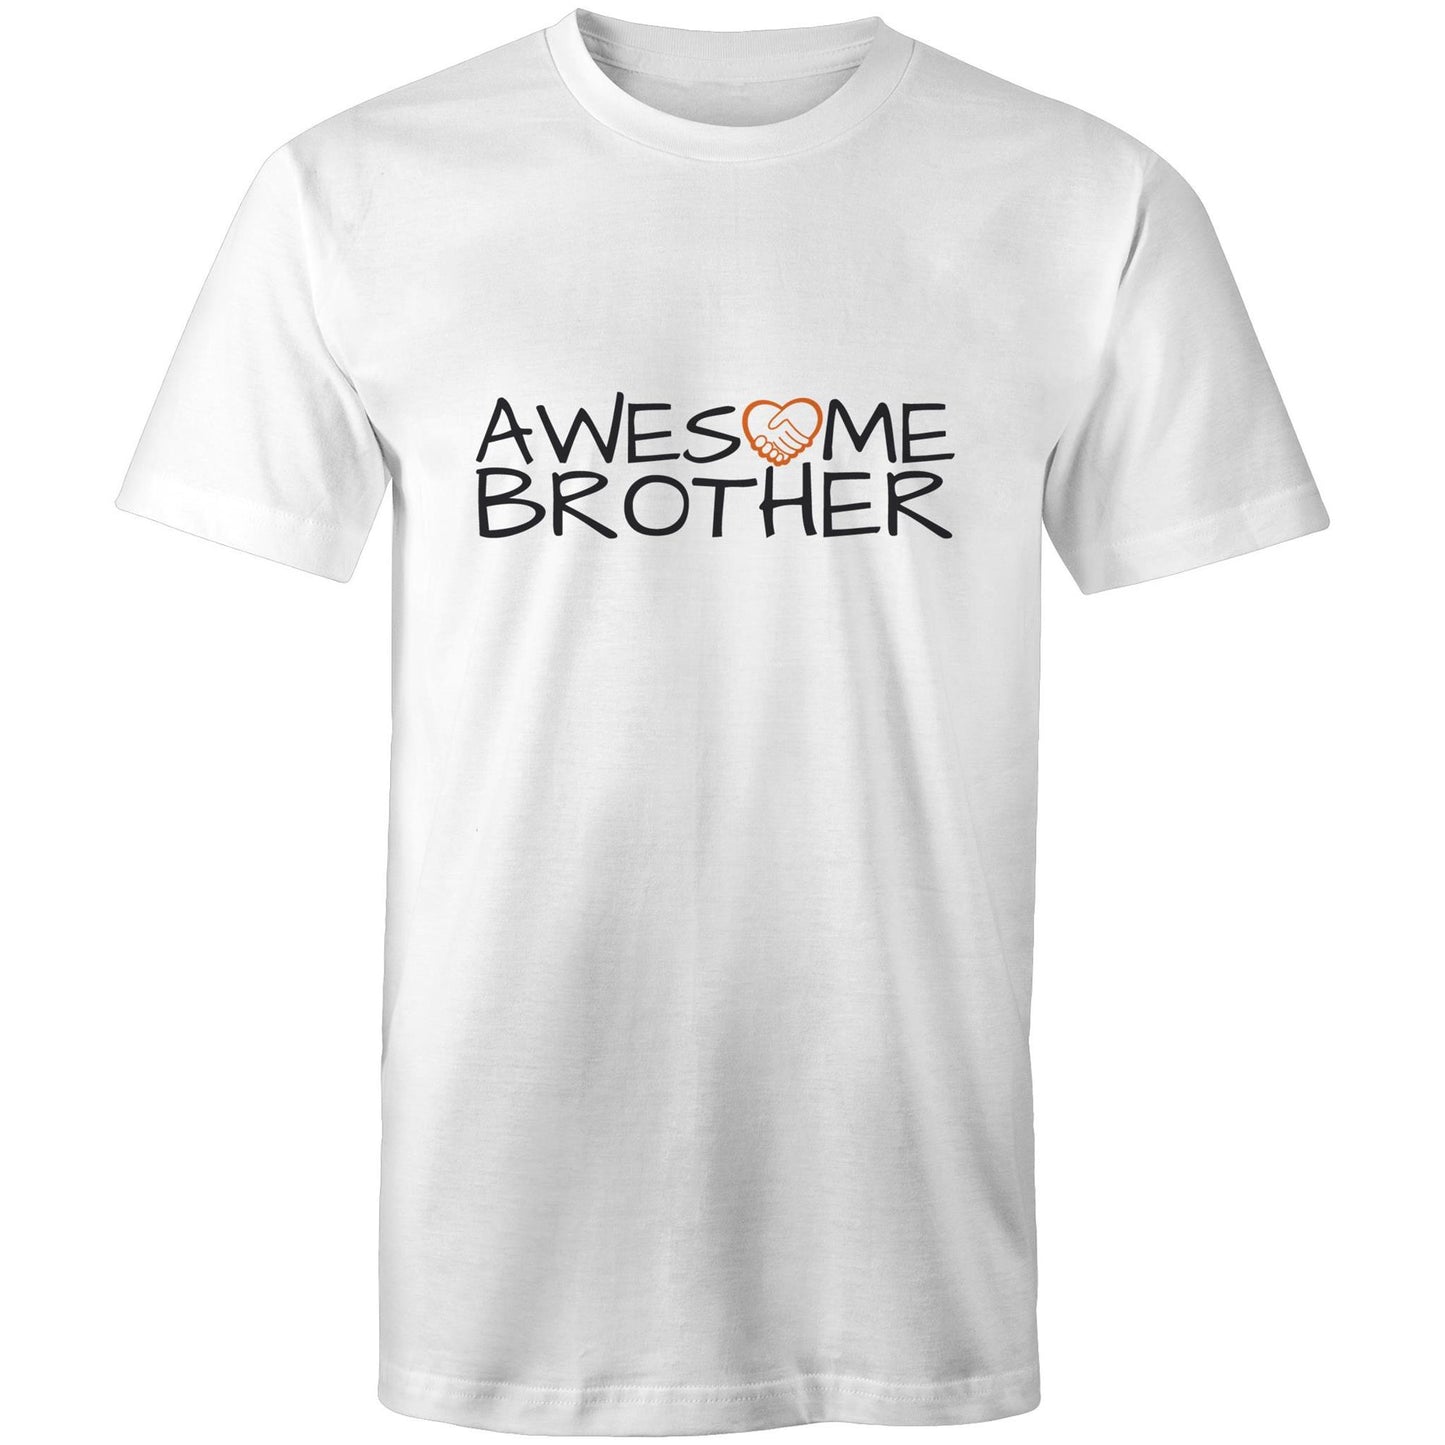 Awesome Brother T-shirt